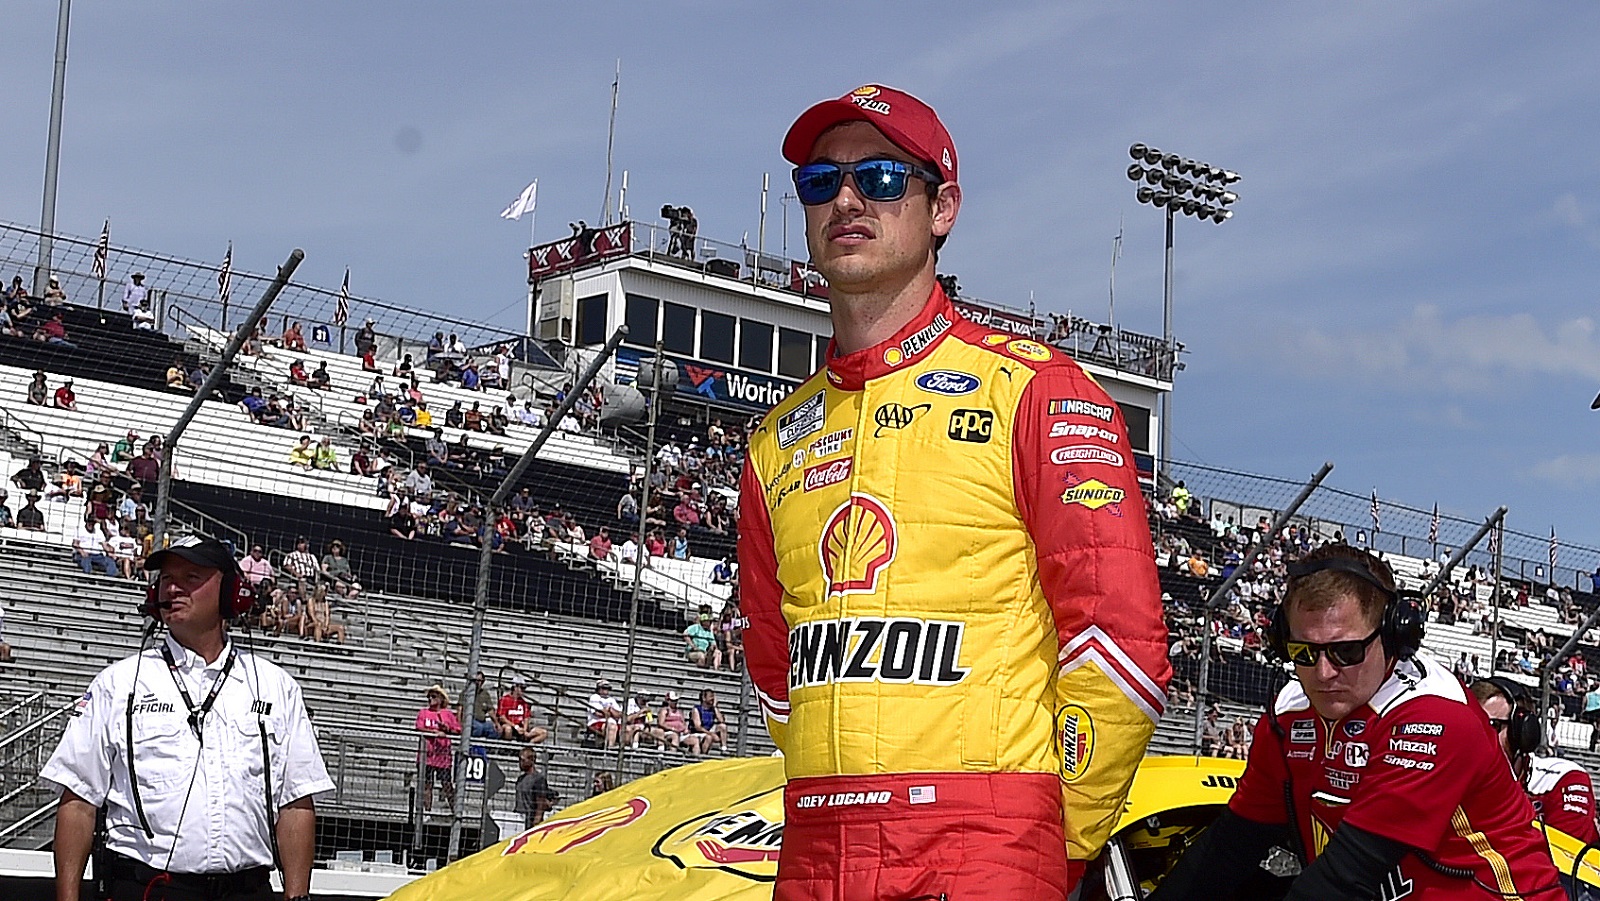 Joey Logano walks the grid during qualifying for the NASCAR Cup Series Enjoy Illinois 300 at WWT Raceway on June 4, 2022.